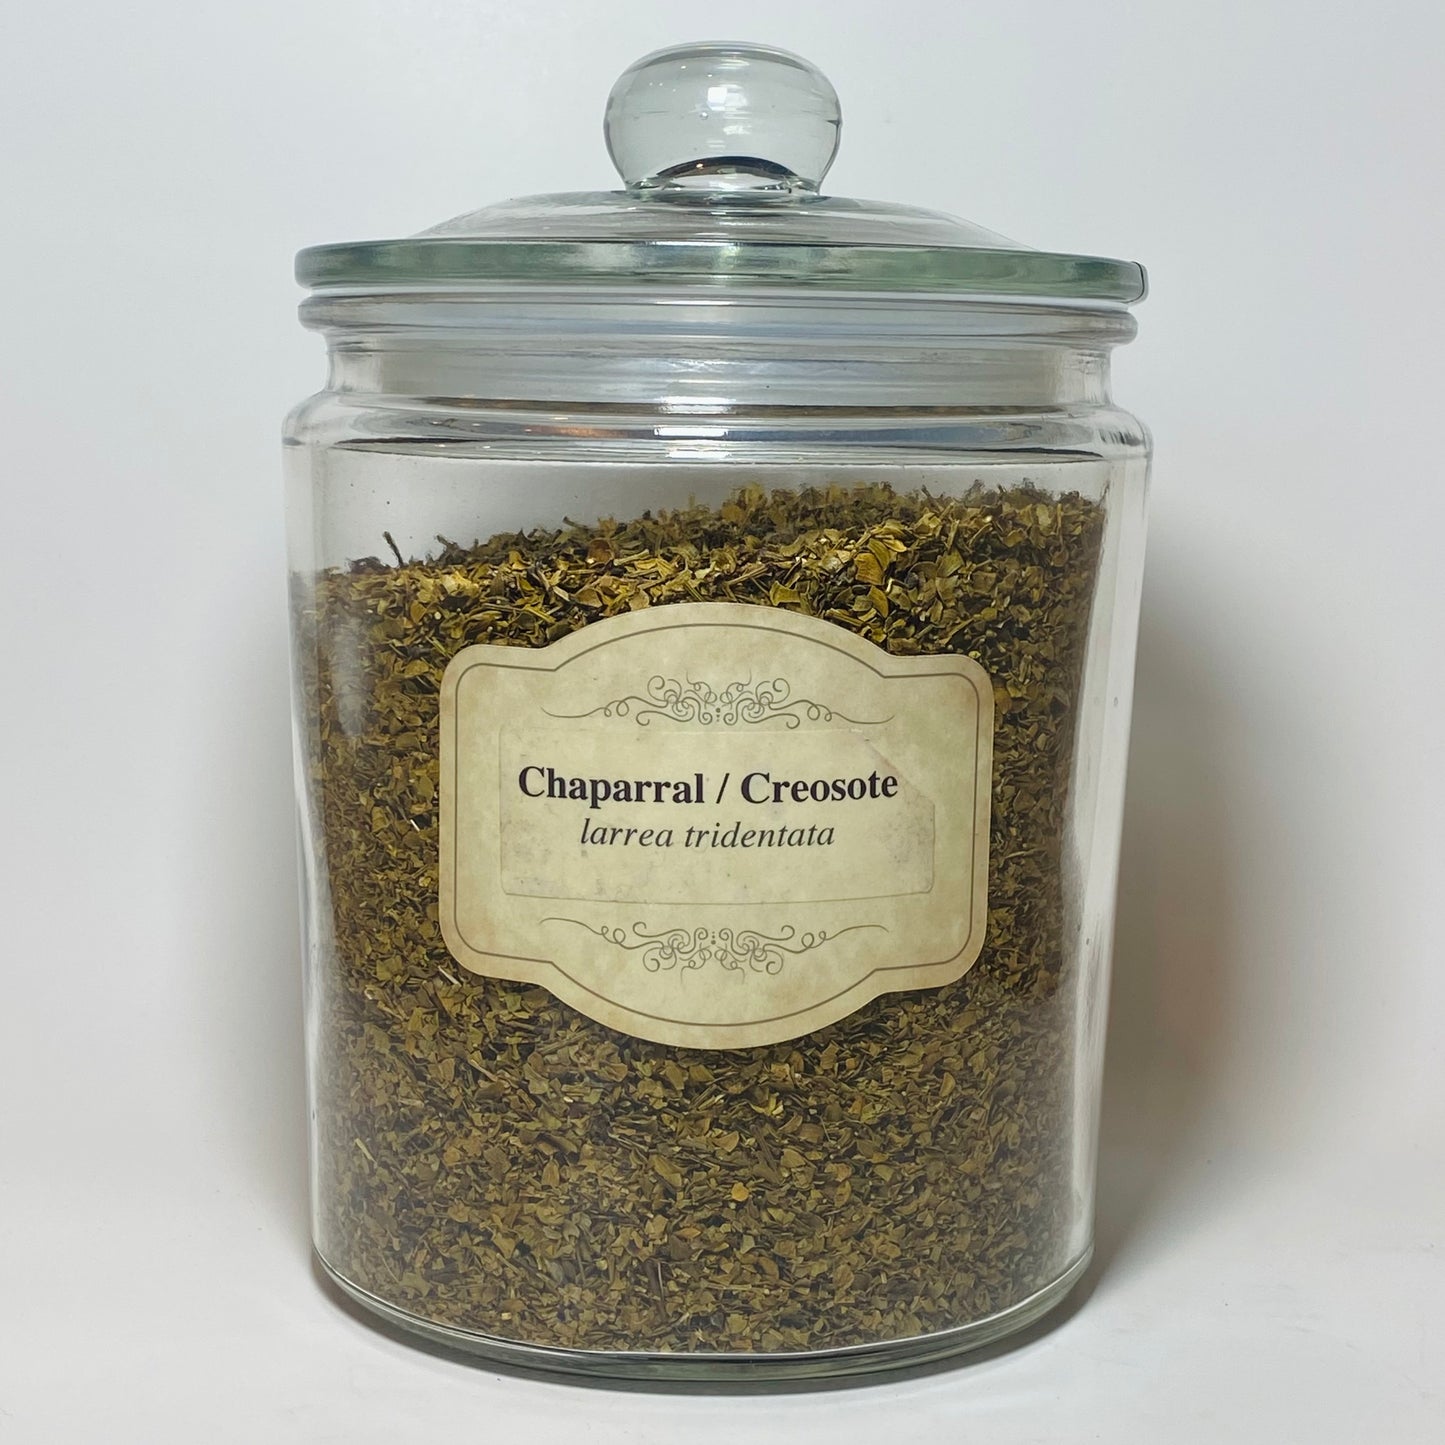 Chaparral/ Creosote